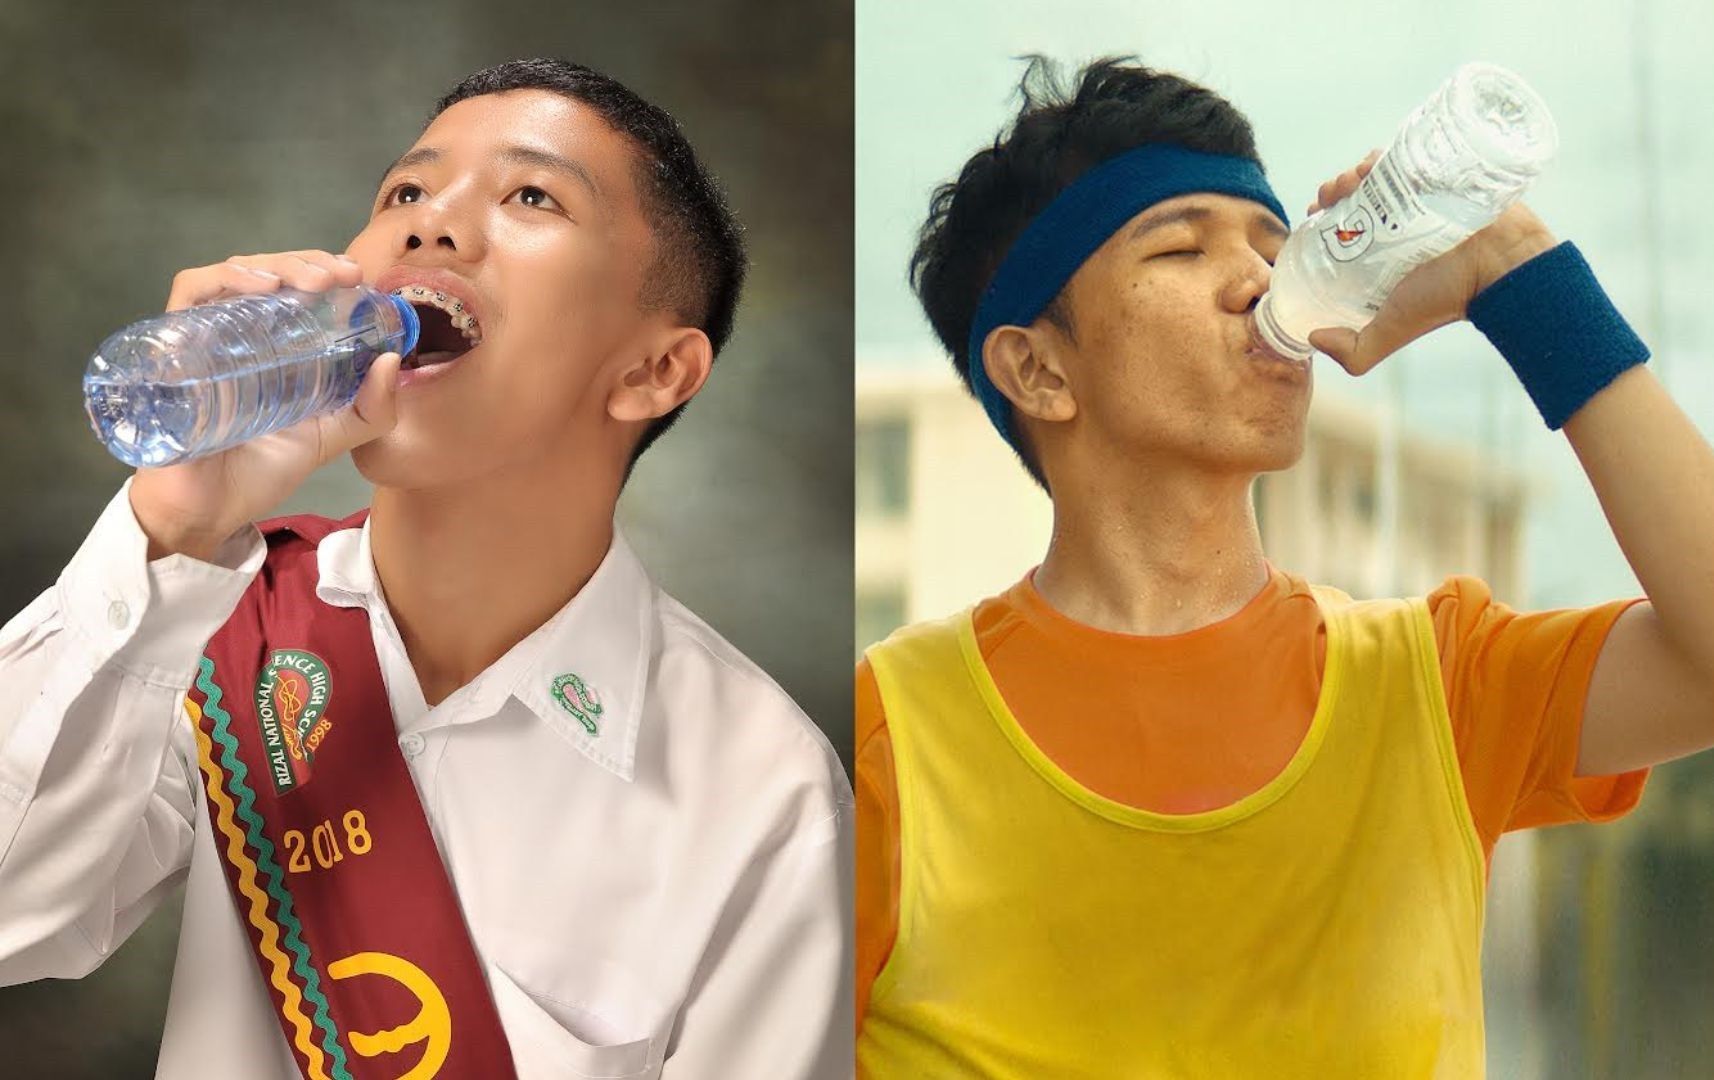 Viral student Drink Water Rivera now energy drink endorser